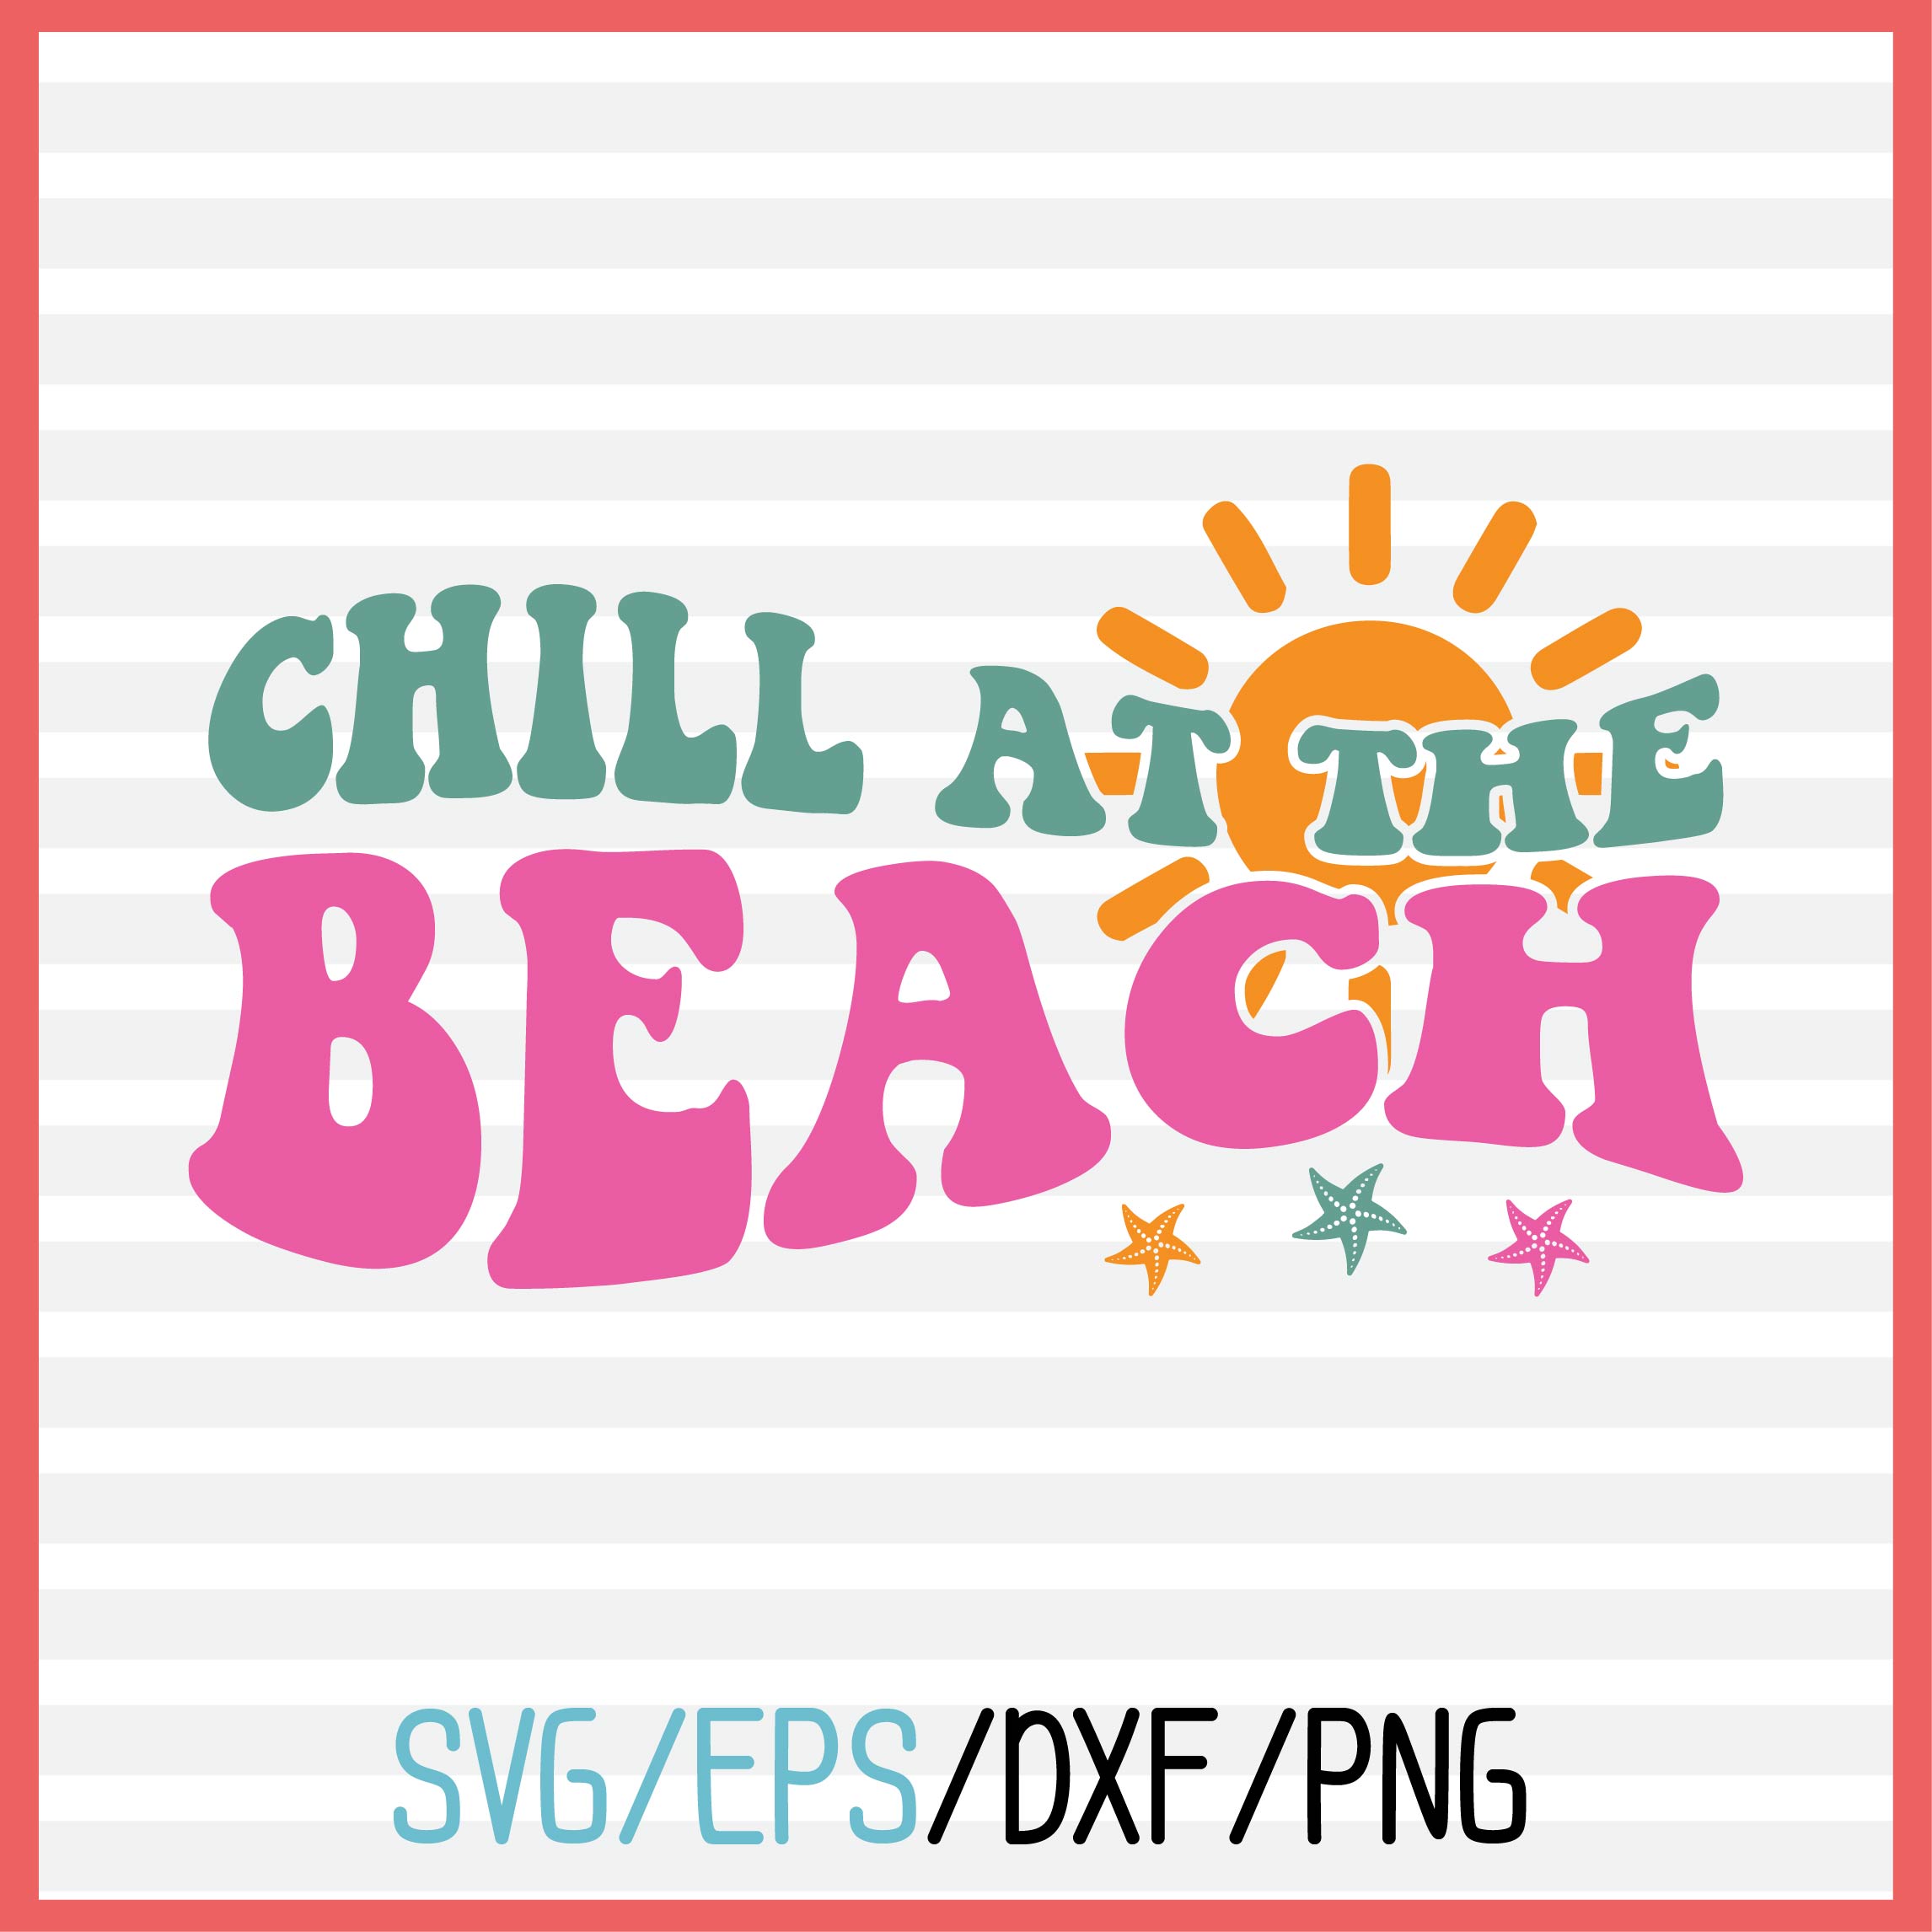 About Chill at the beach Retro svg design cover image.